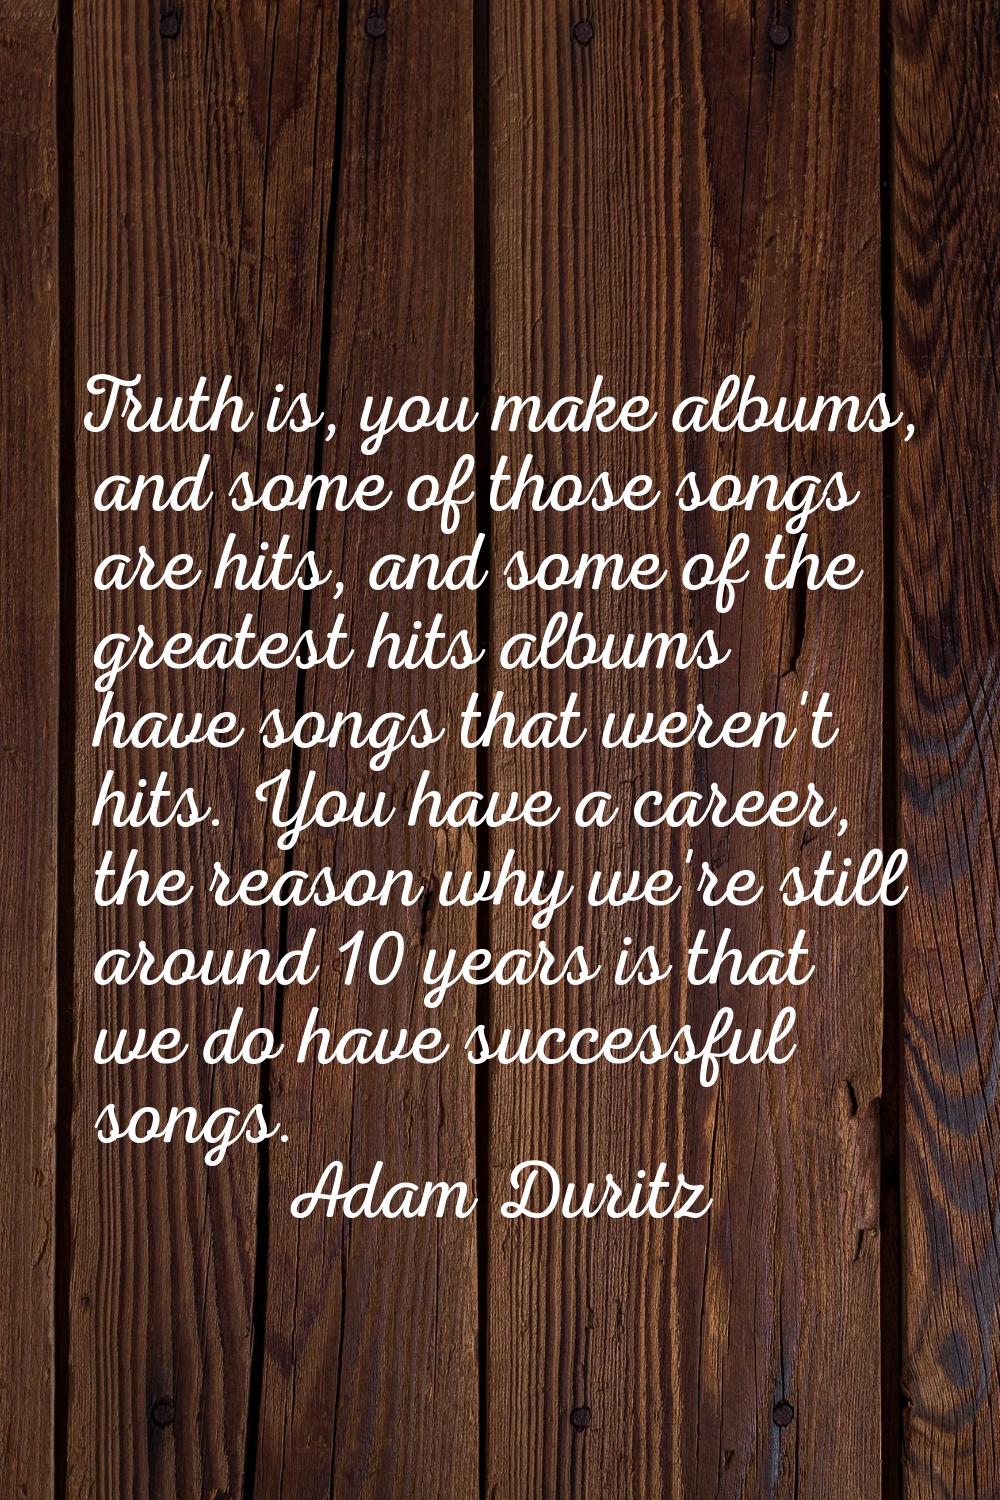 Truth is, you make albums, and some of those songs are hits, and some of the greatest hits albums h